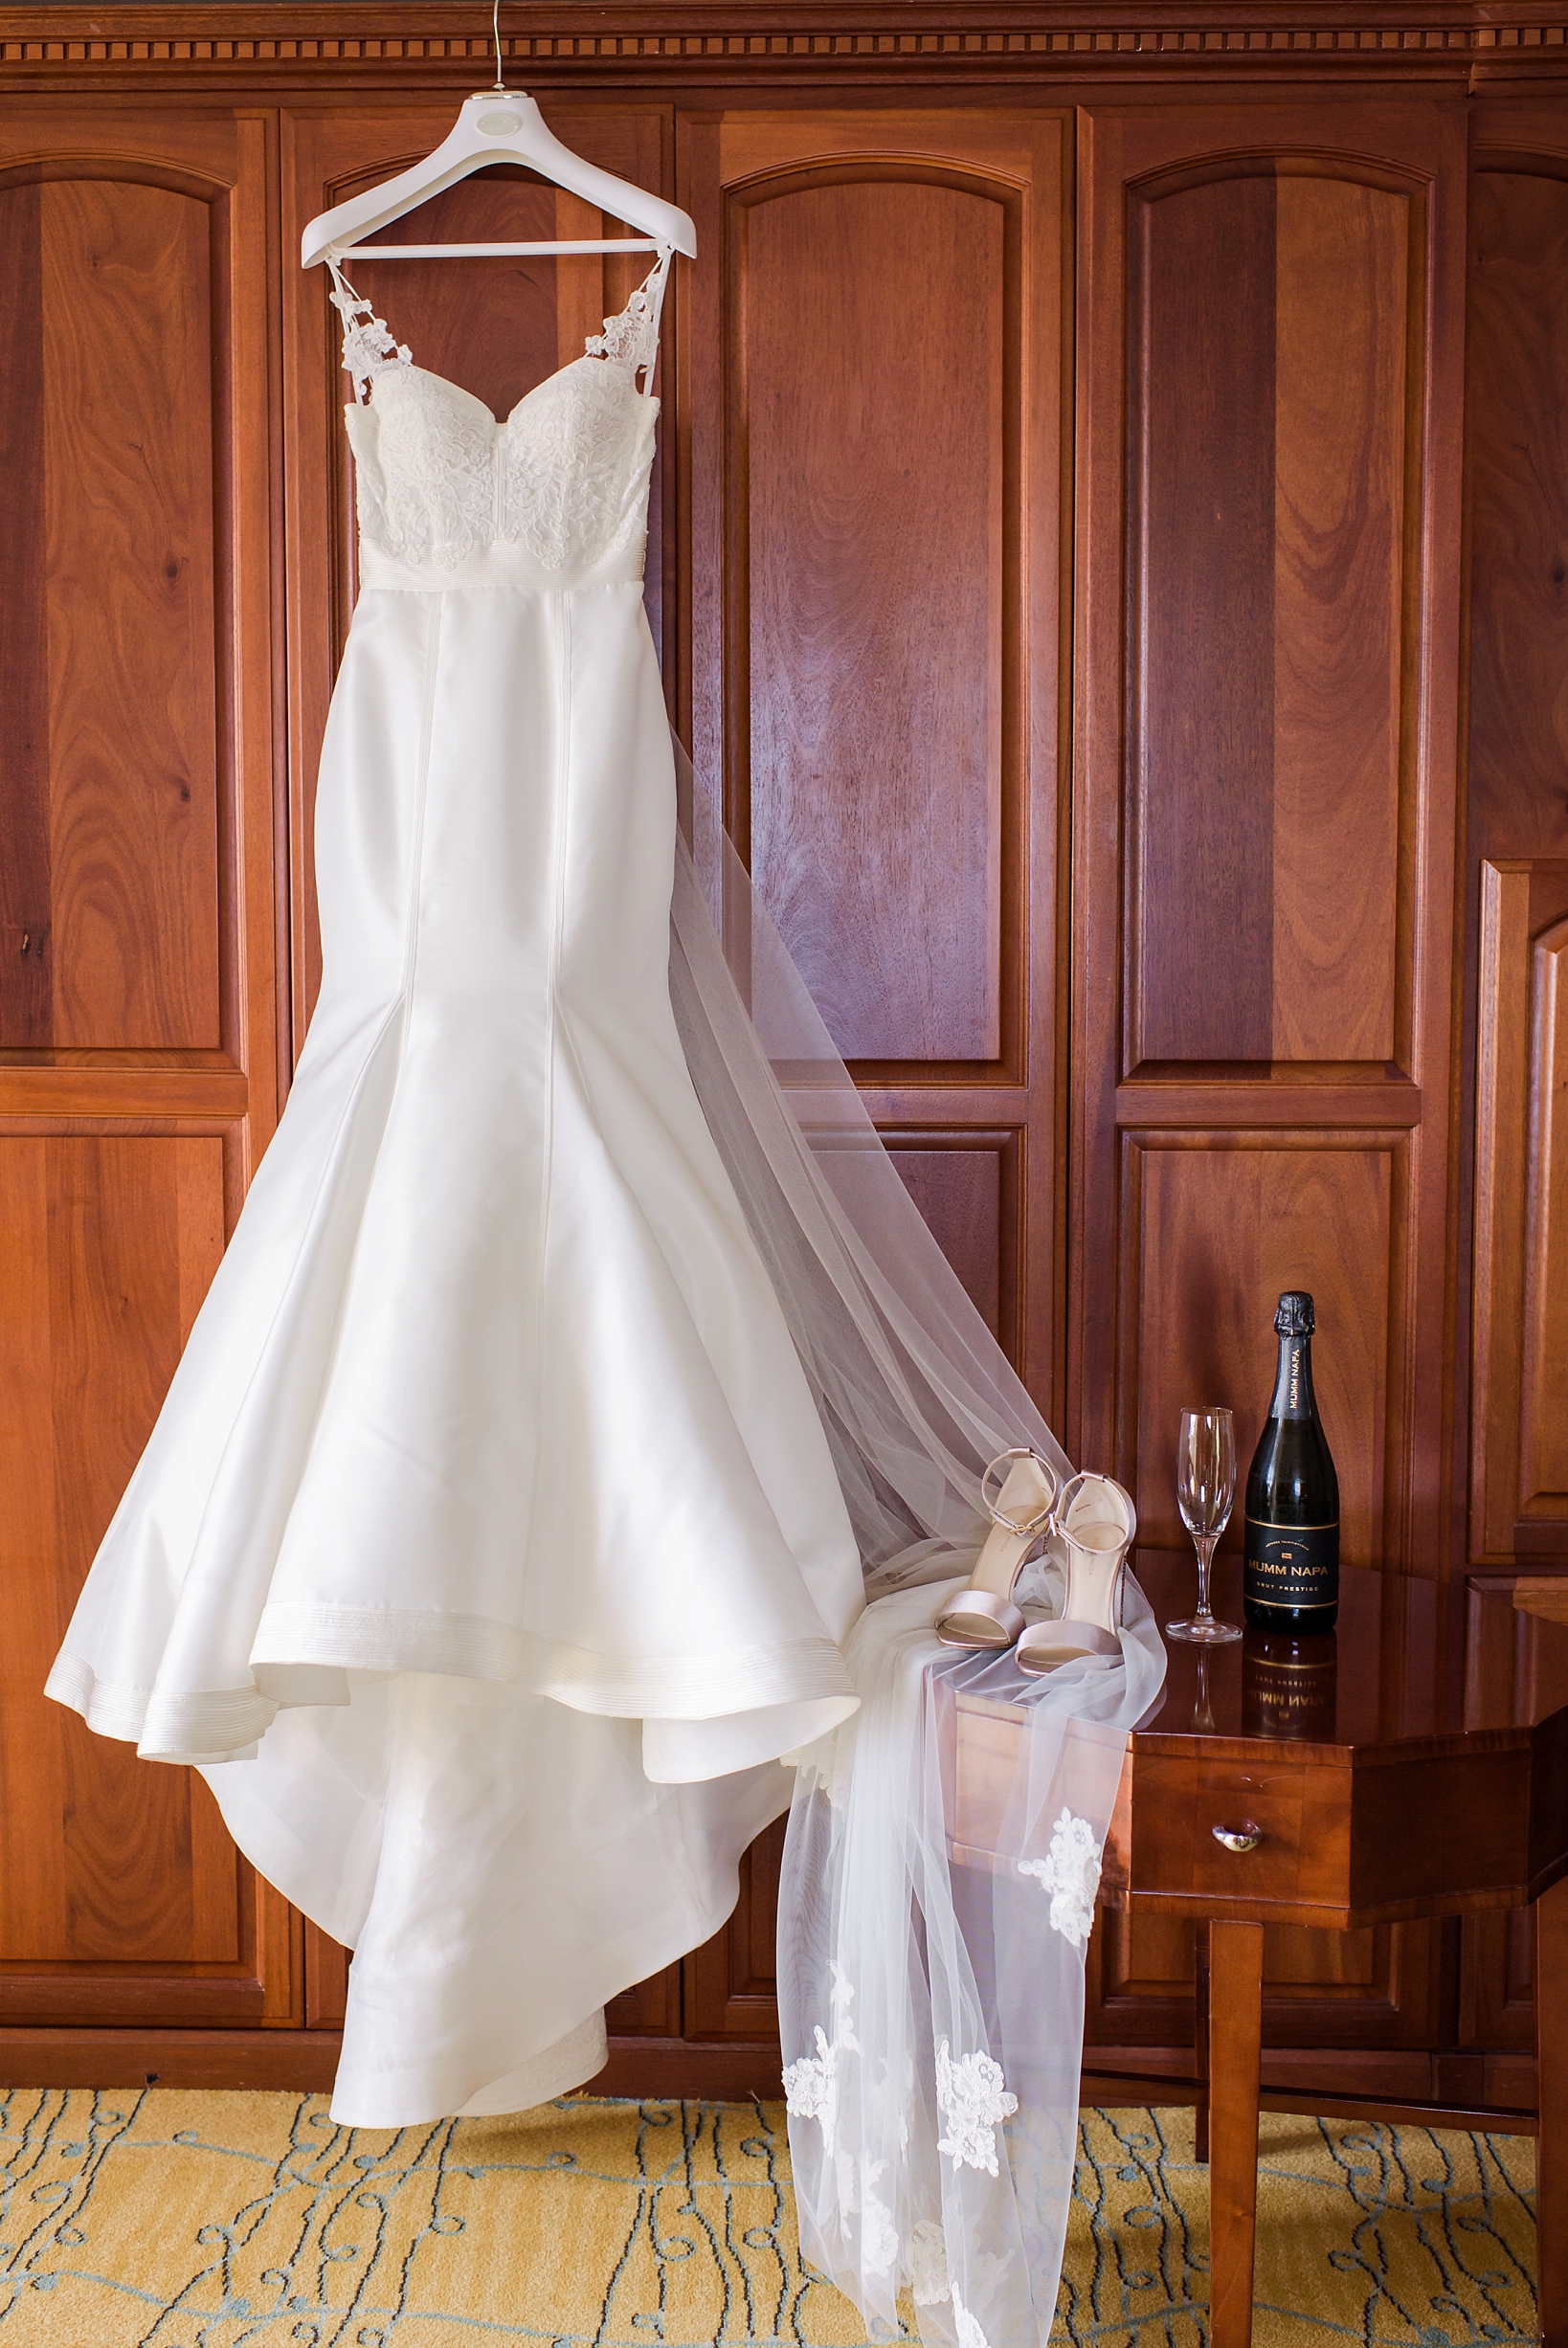 The wedding dress and shoes with champagne accent against a wooden background